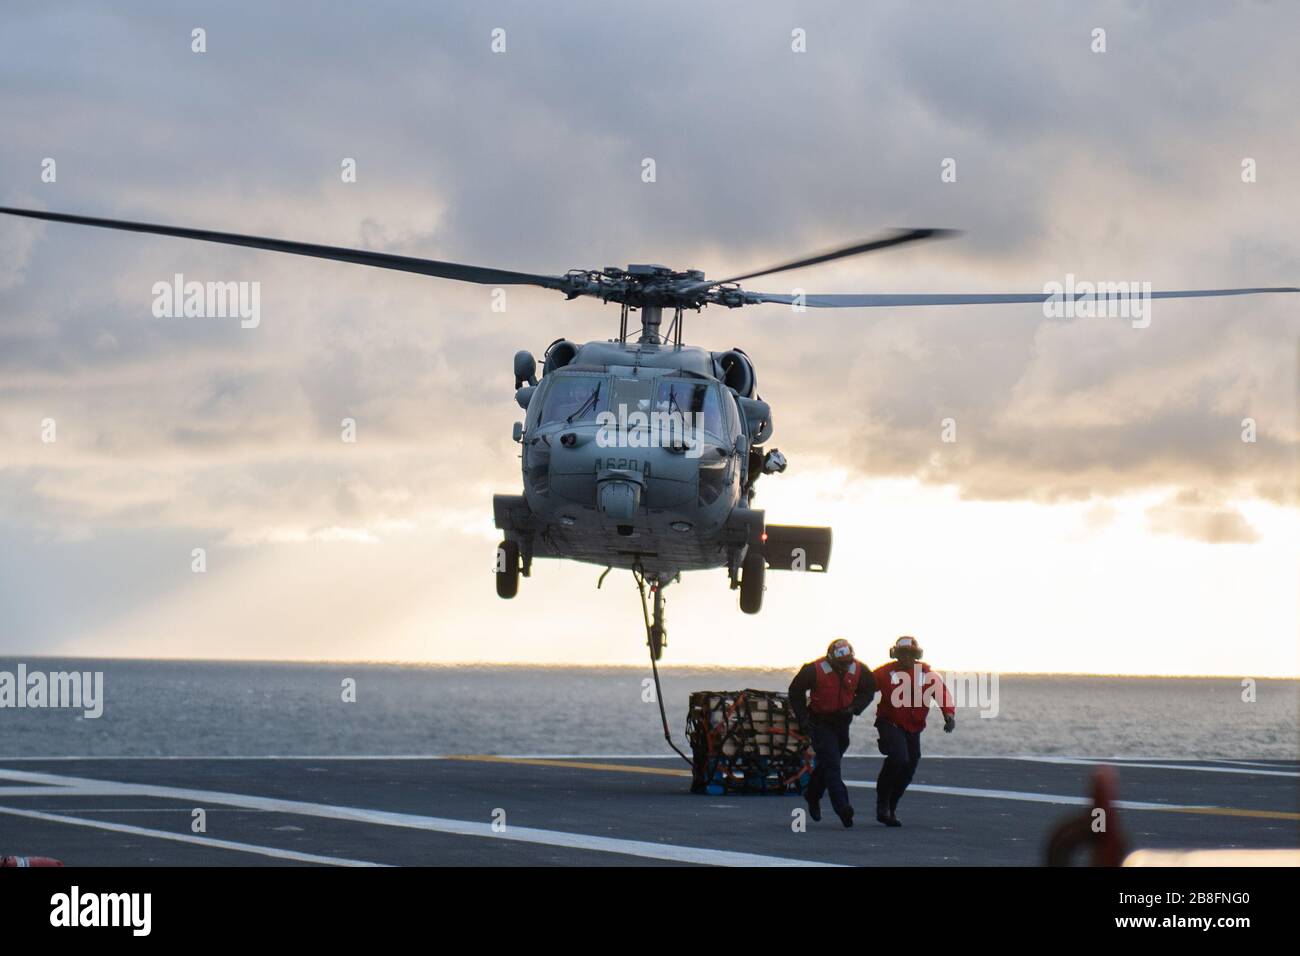 An MH-60S Seahawk, attached to Helicopter Sea Combat Squadron (HSC) 9, conducts a vertical replenishment (VERTREP) exercise with the aircraft carrier USS Gerald R. Ford (CVN 78) in the Atlantic Ocean, March 15, 2020. HSC 9 is currently underway with the Ford supporting flight operations. (U.S. Navy photo by Mass Communication Specialist 3rd Class Rebekah M. Rinckey) Stock Photo